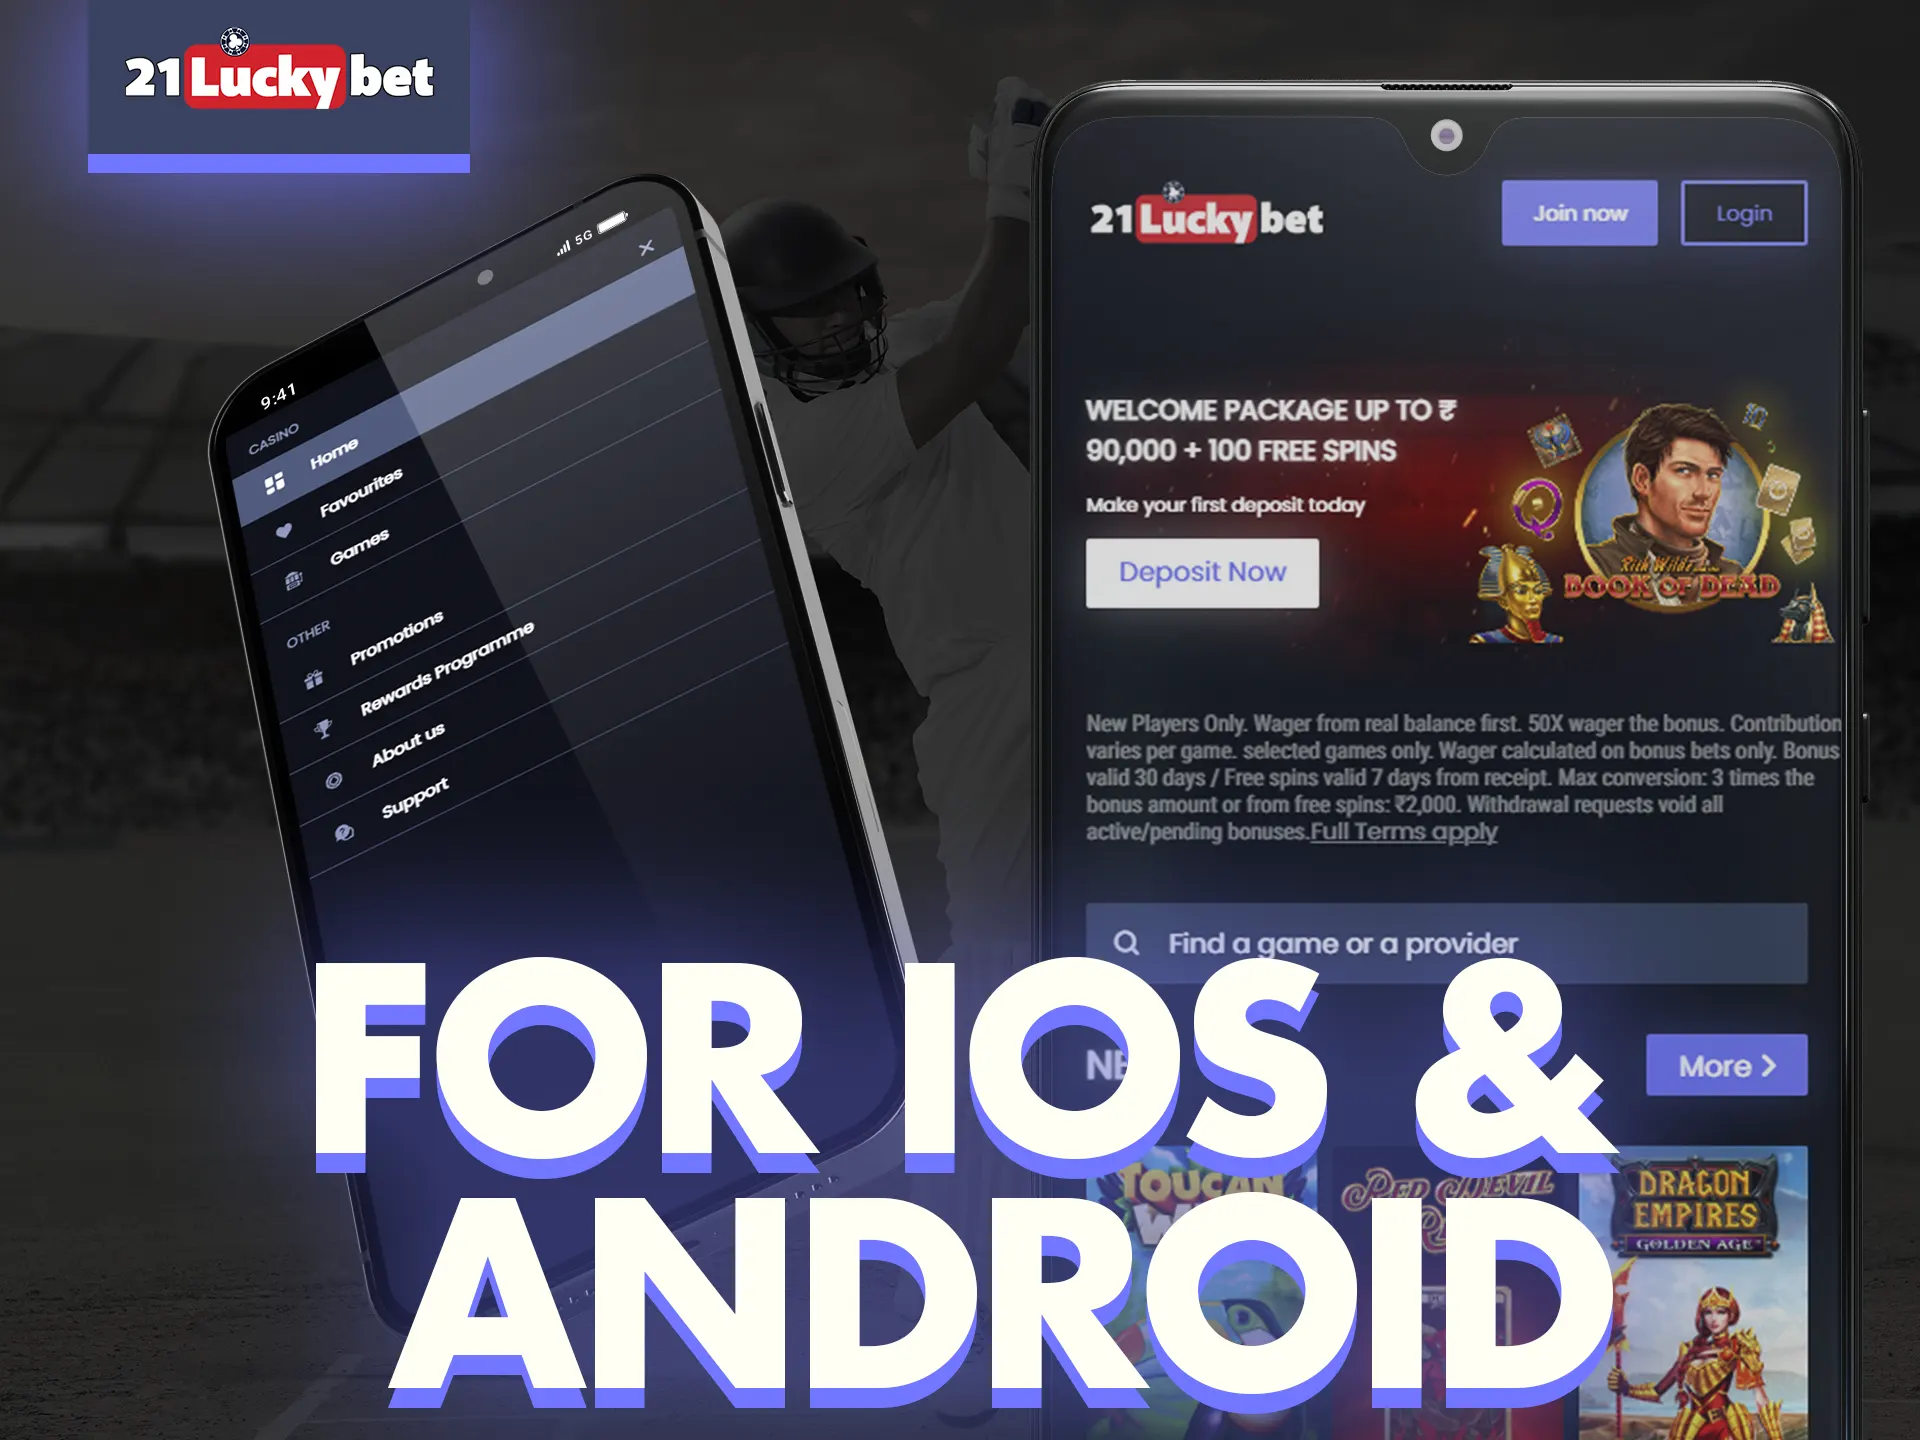 21luckybet has app for android and iOS.